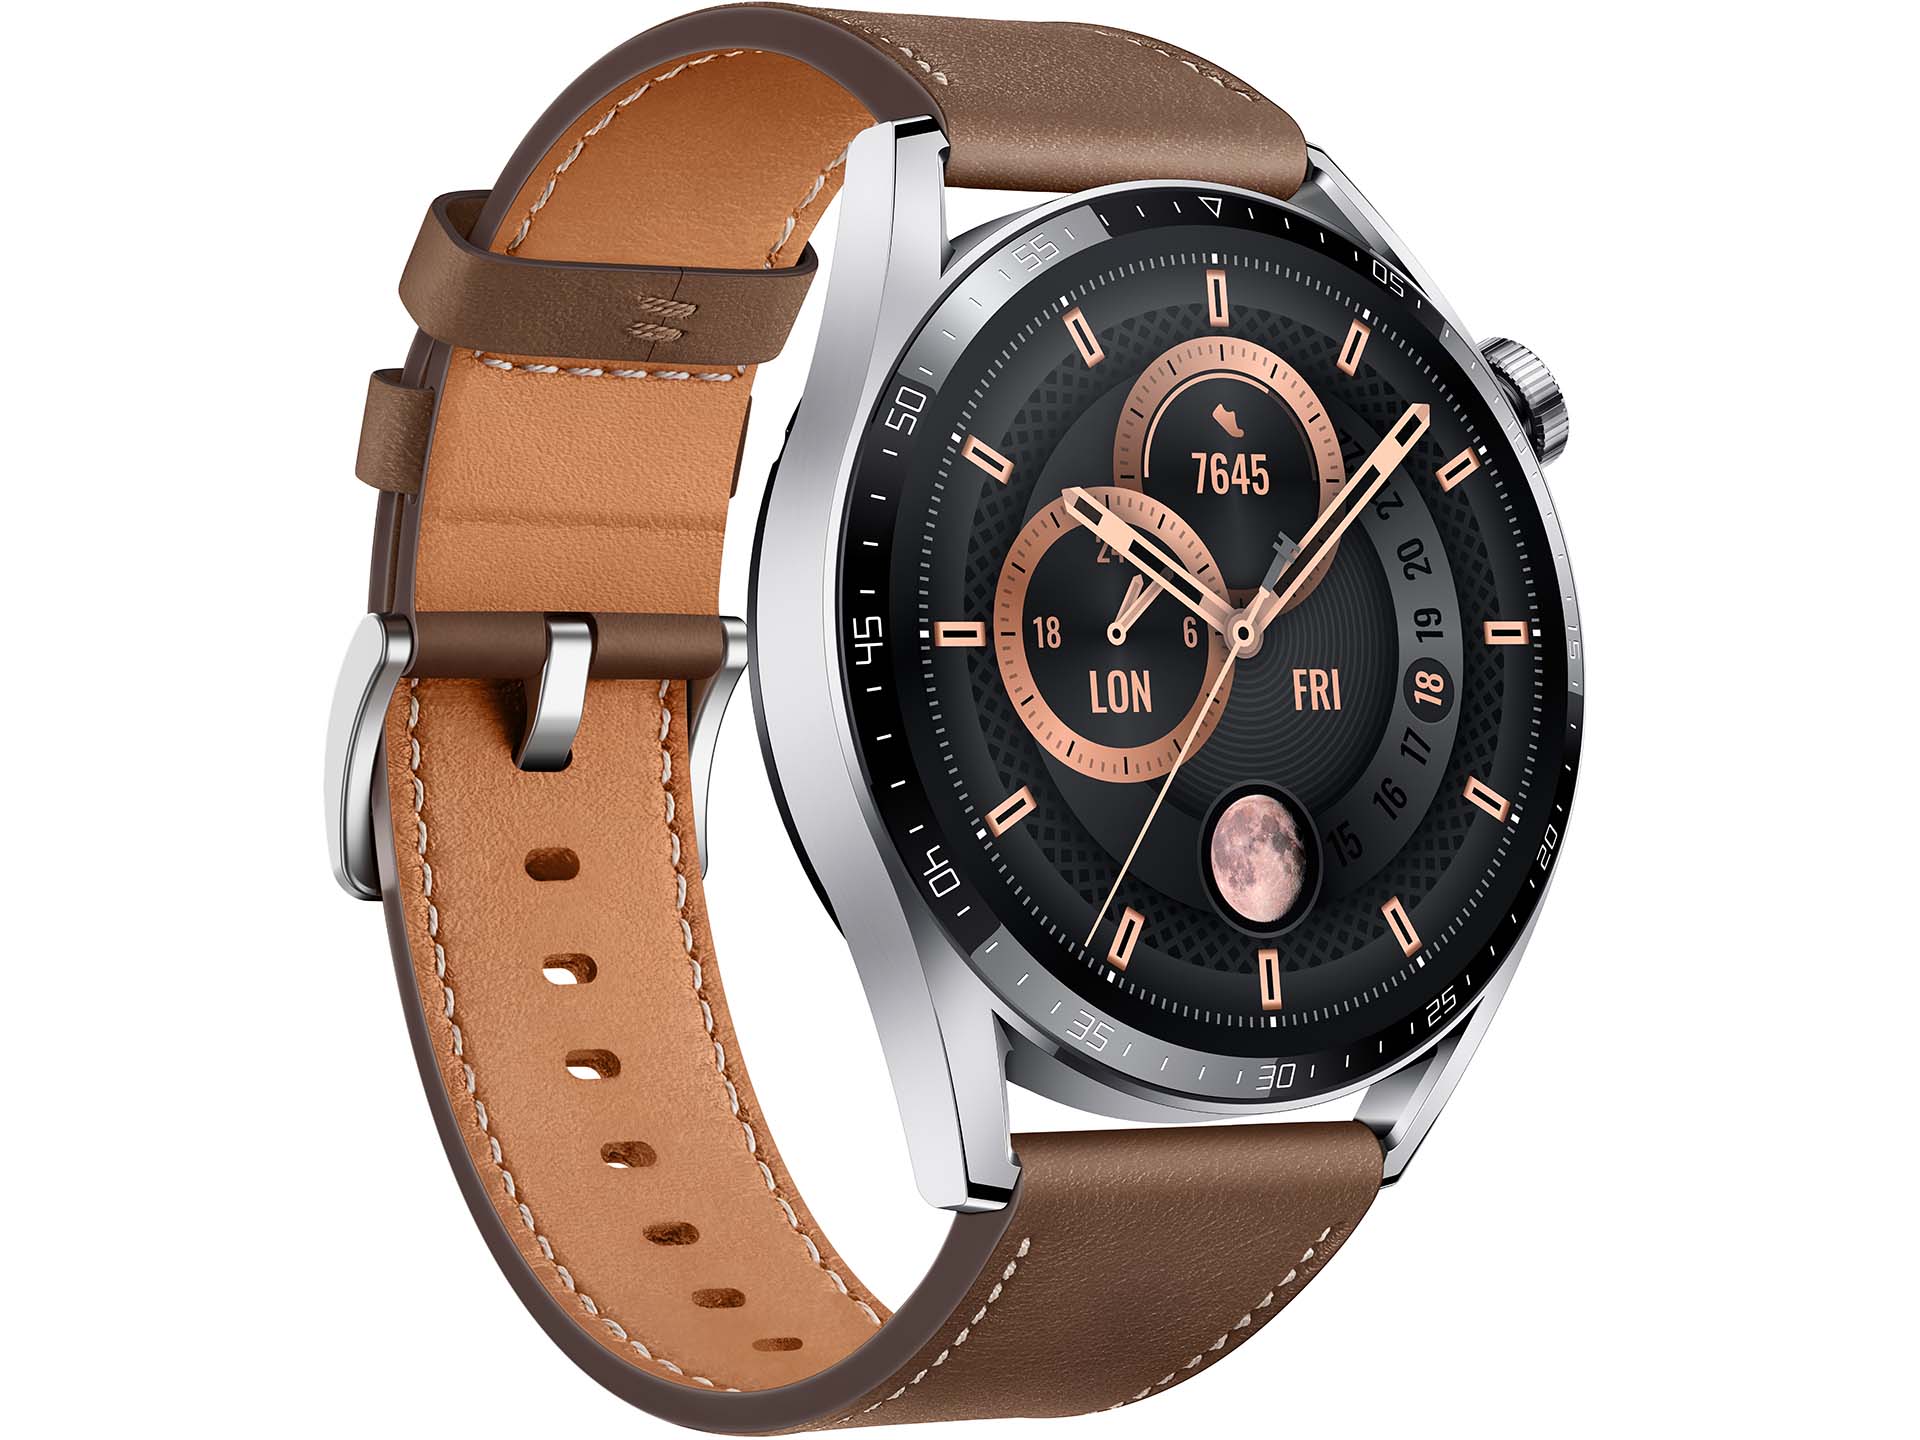 Huawei Watch GT 3 Smartwatch in Review: Classy looks and